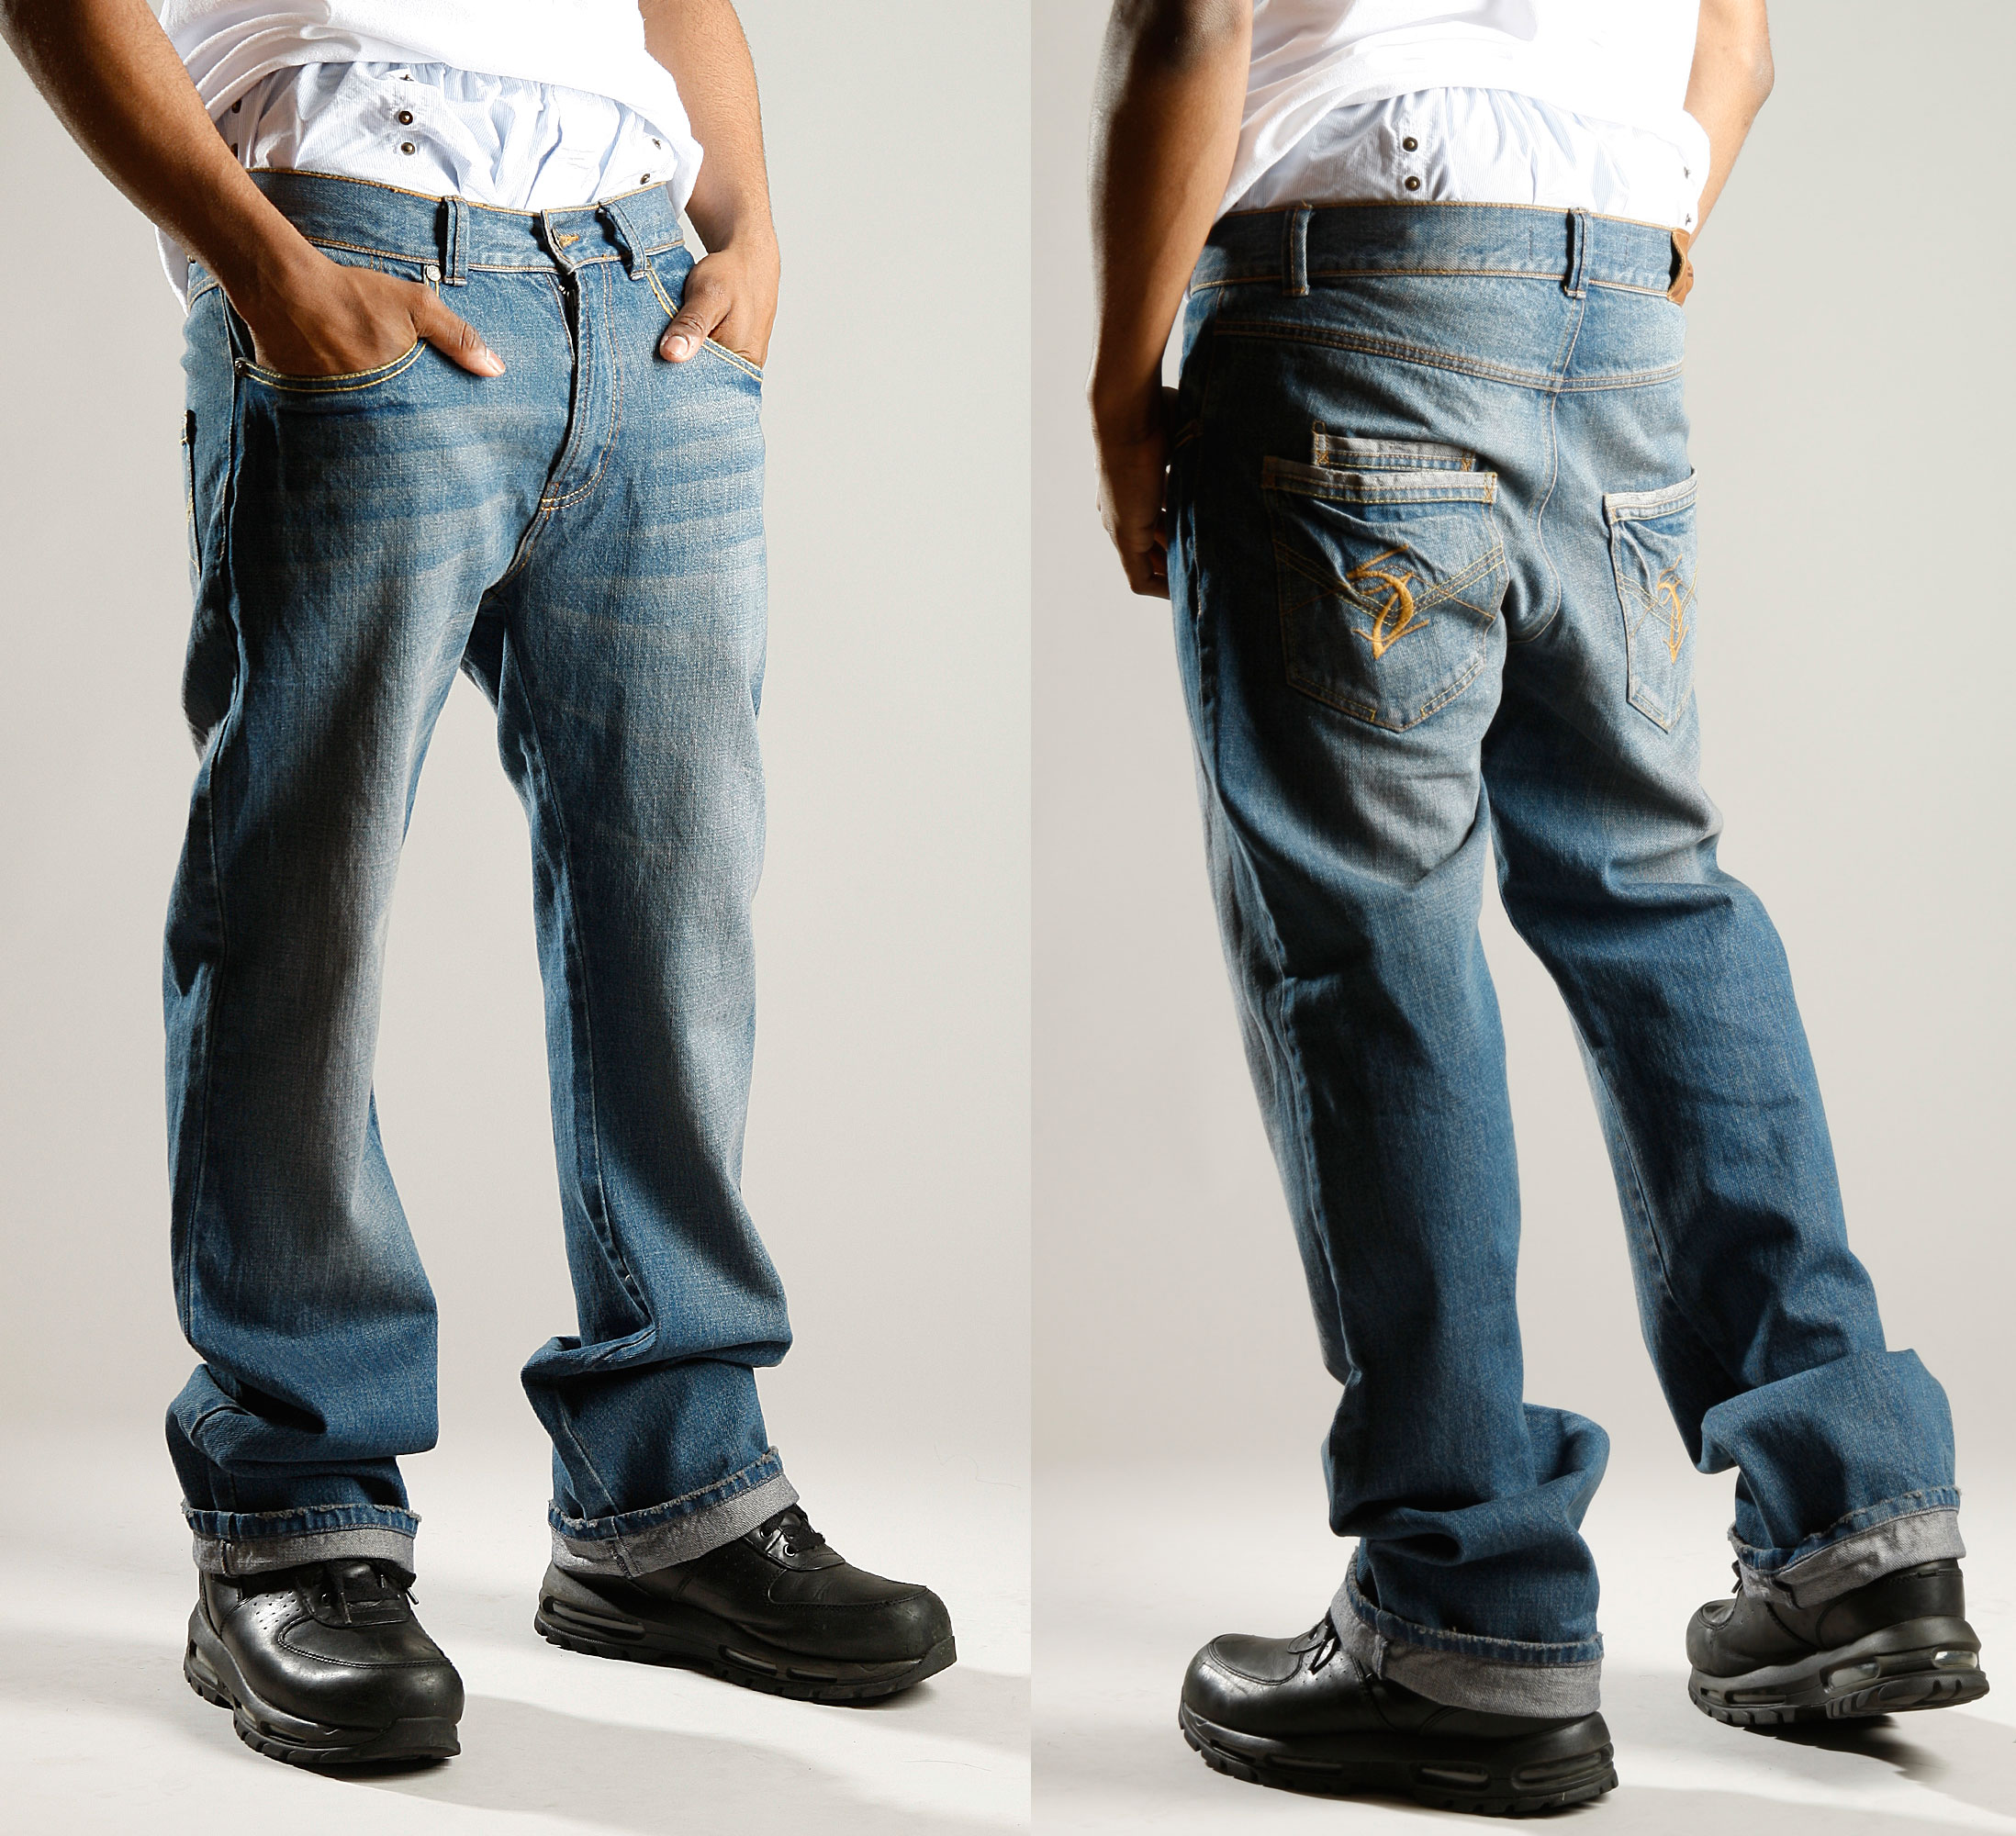 Boxer jeans Today 5pm pst The boxers are built in to the jeans